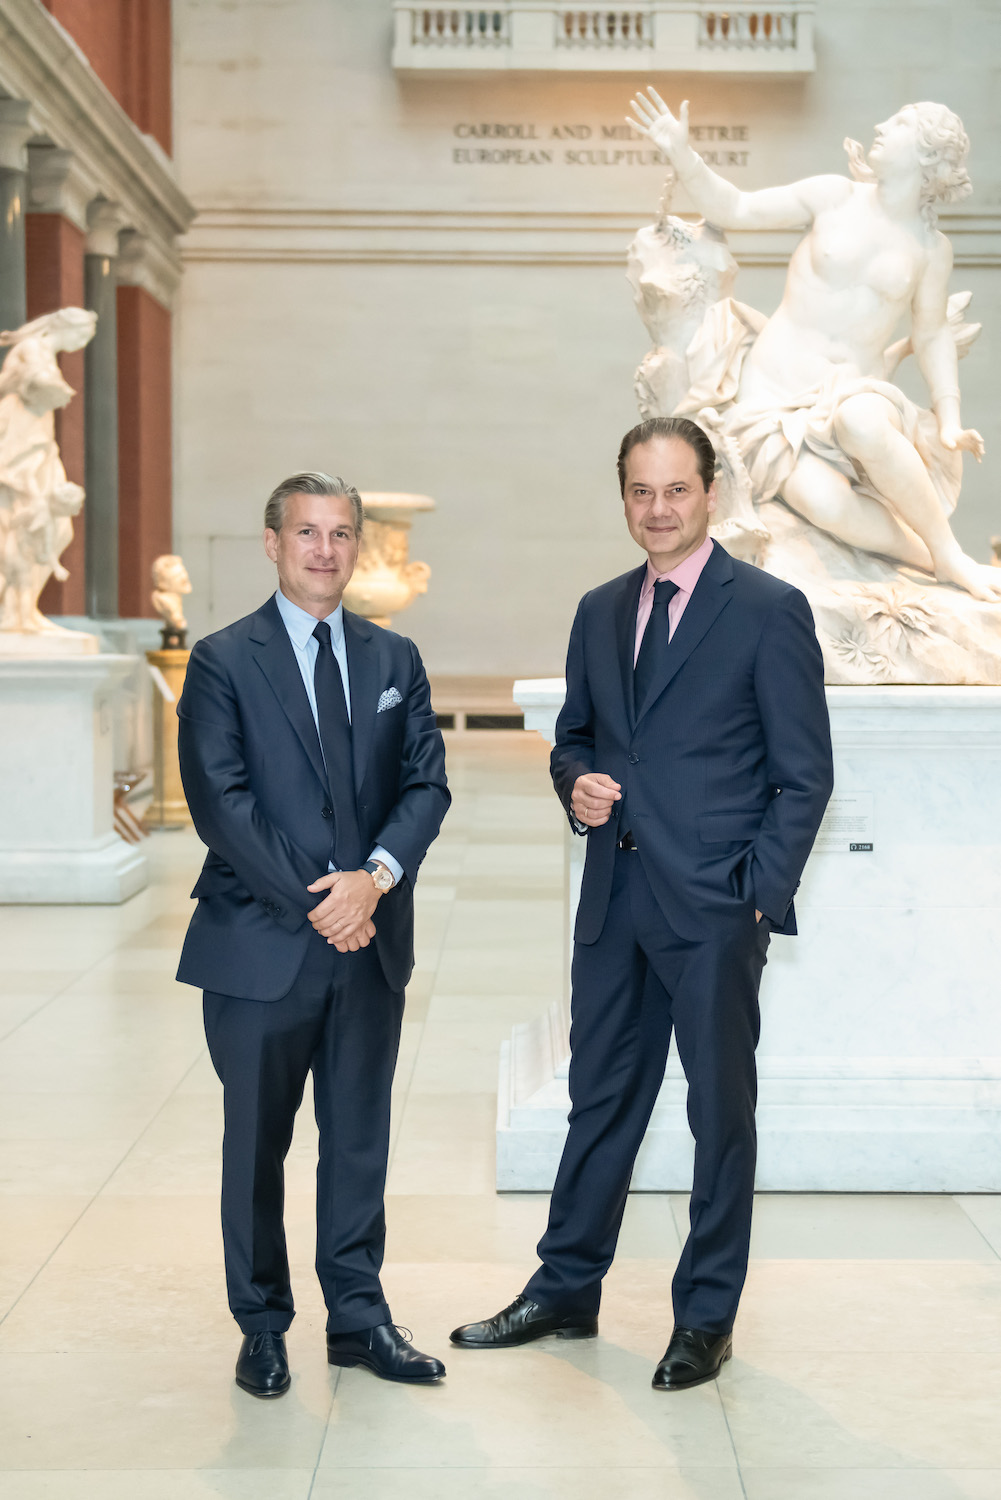 Louis Ferla, CEO of Vacheron Constantin, and Max Hollein, The Met’s Marina Kellen French Director and CEO